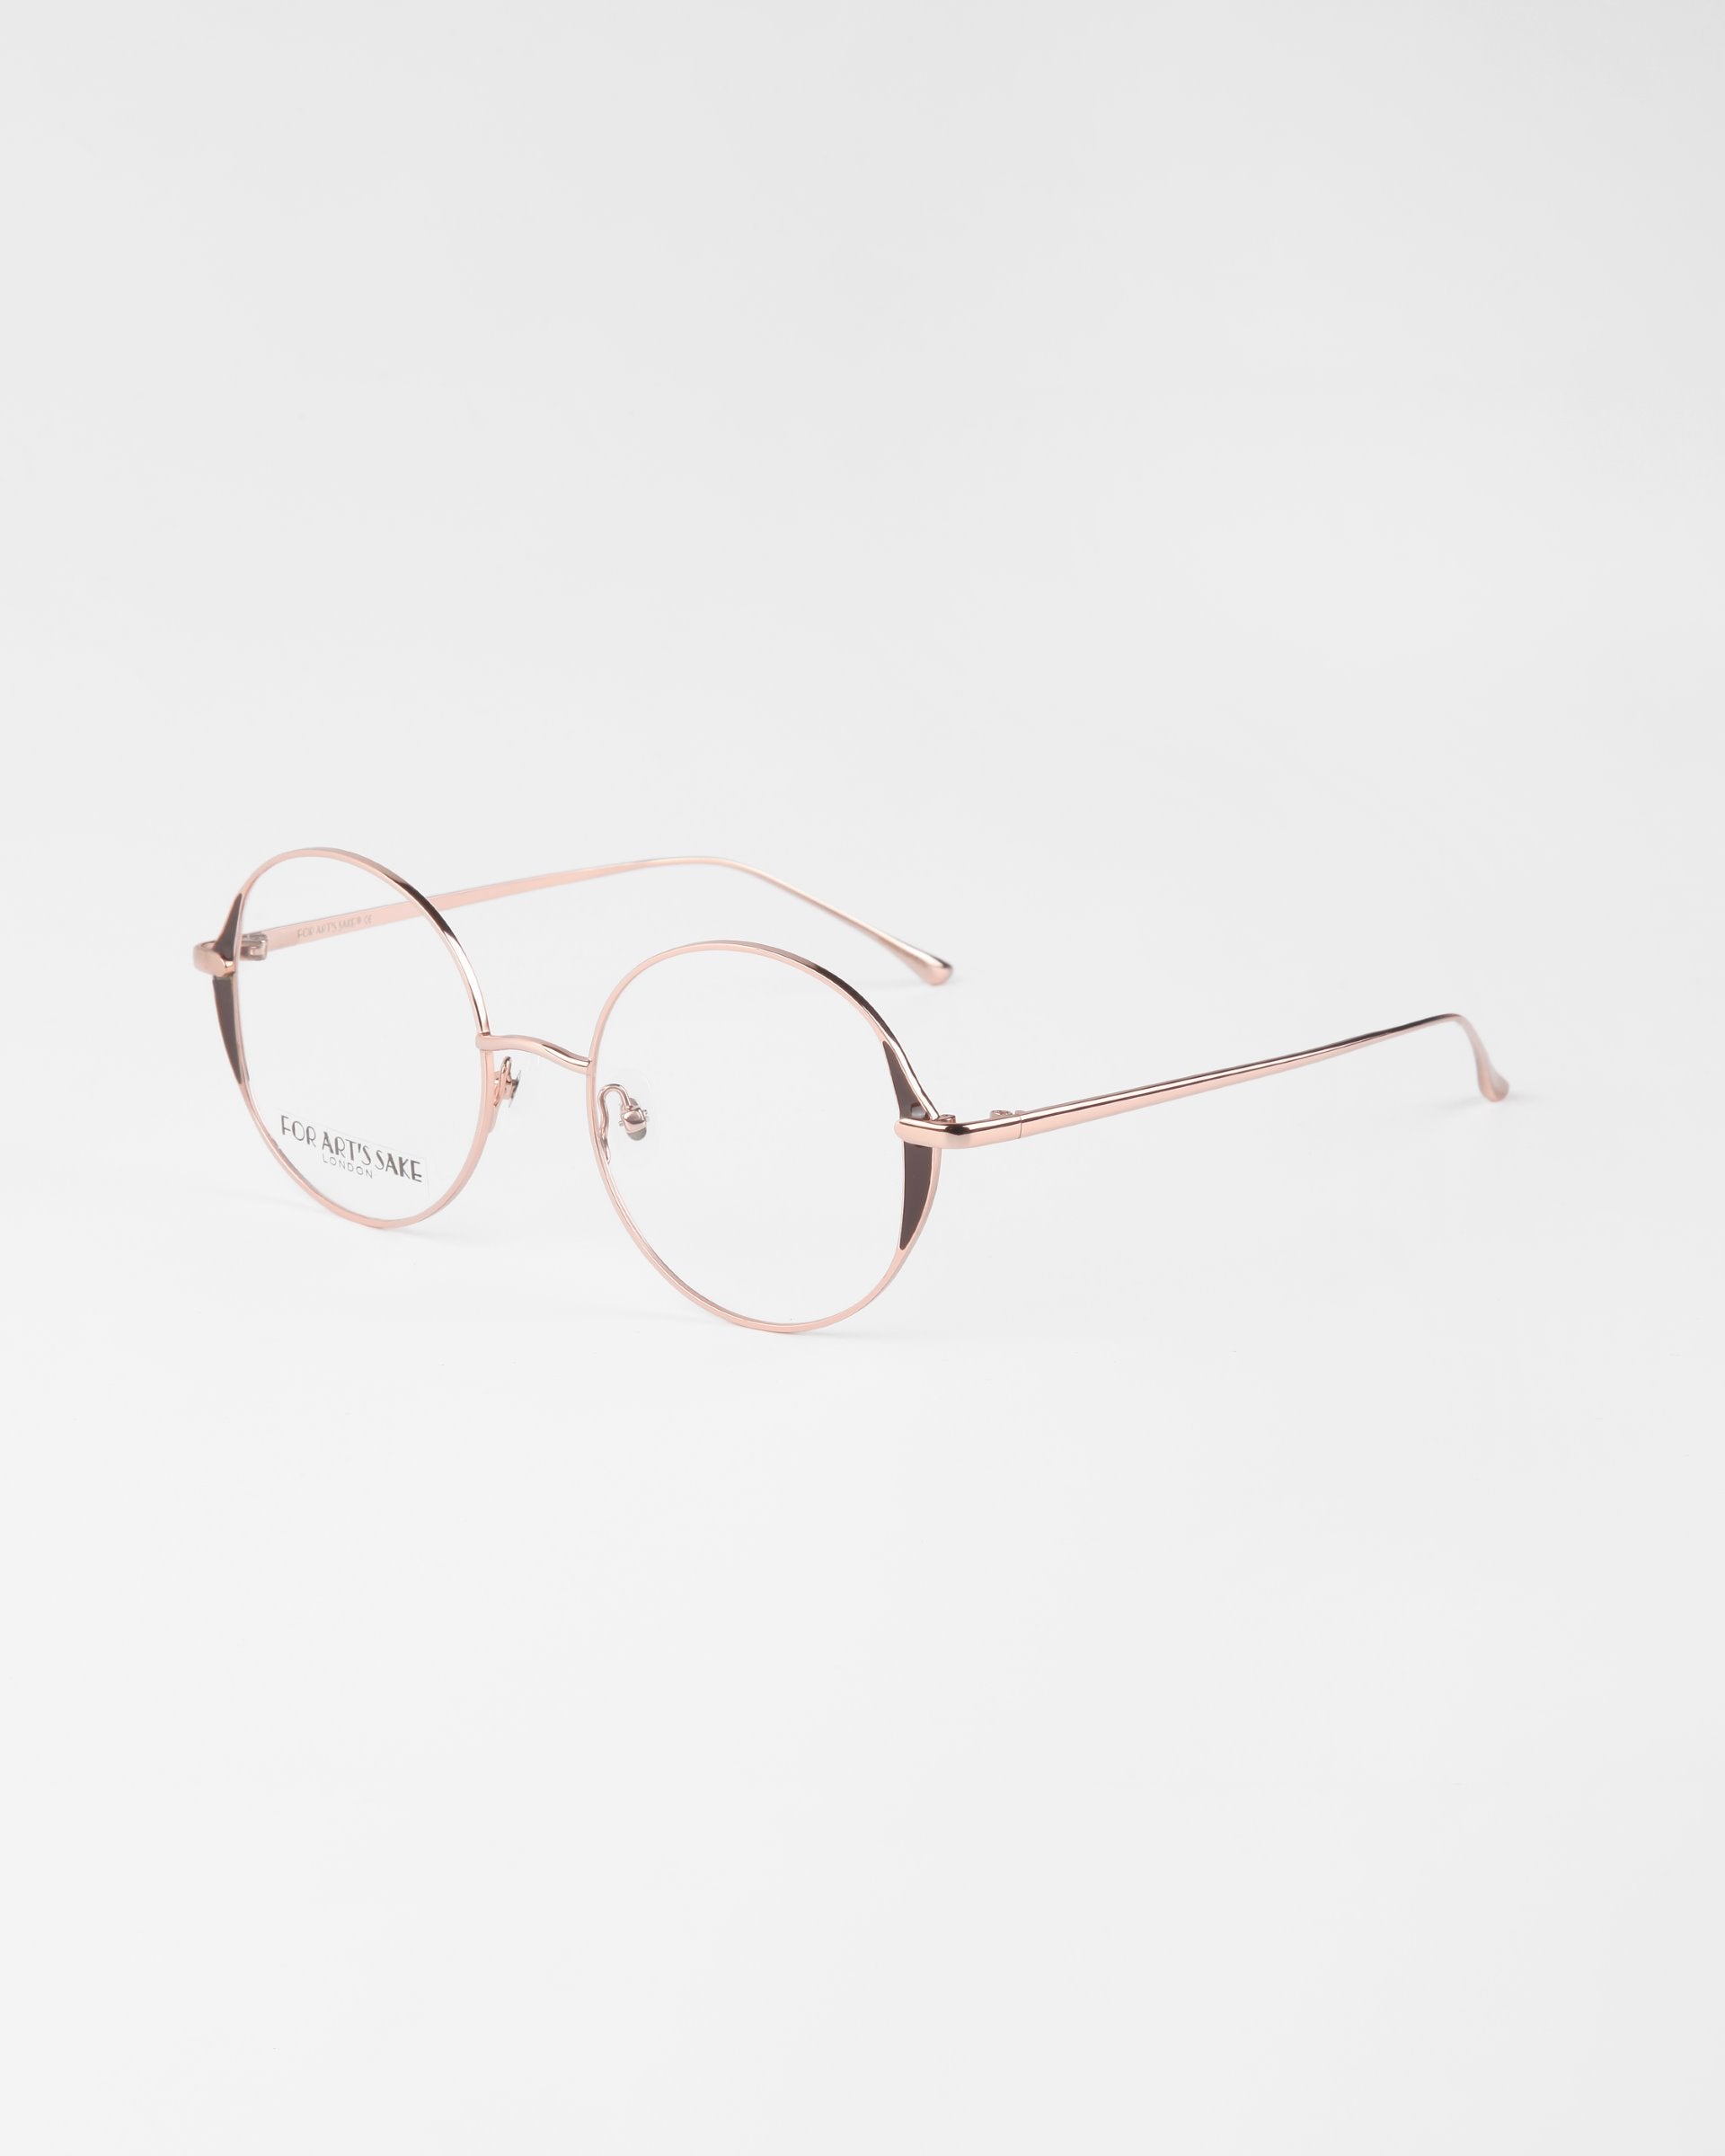 A pair of round, thin-framed, gold-rimmed eyeglasses with clear lenses and 18-karat gold plating. The design is minimalist, with delicate frames and no visible embellishments on the glasses. The glasses are called Kos by For Art&#39;s Sake® and are placed on a plain white background.